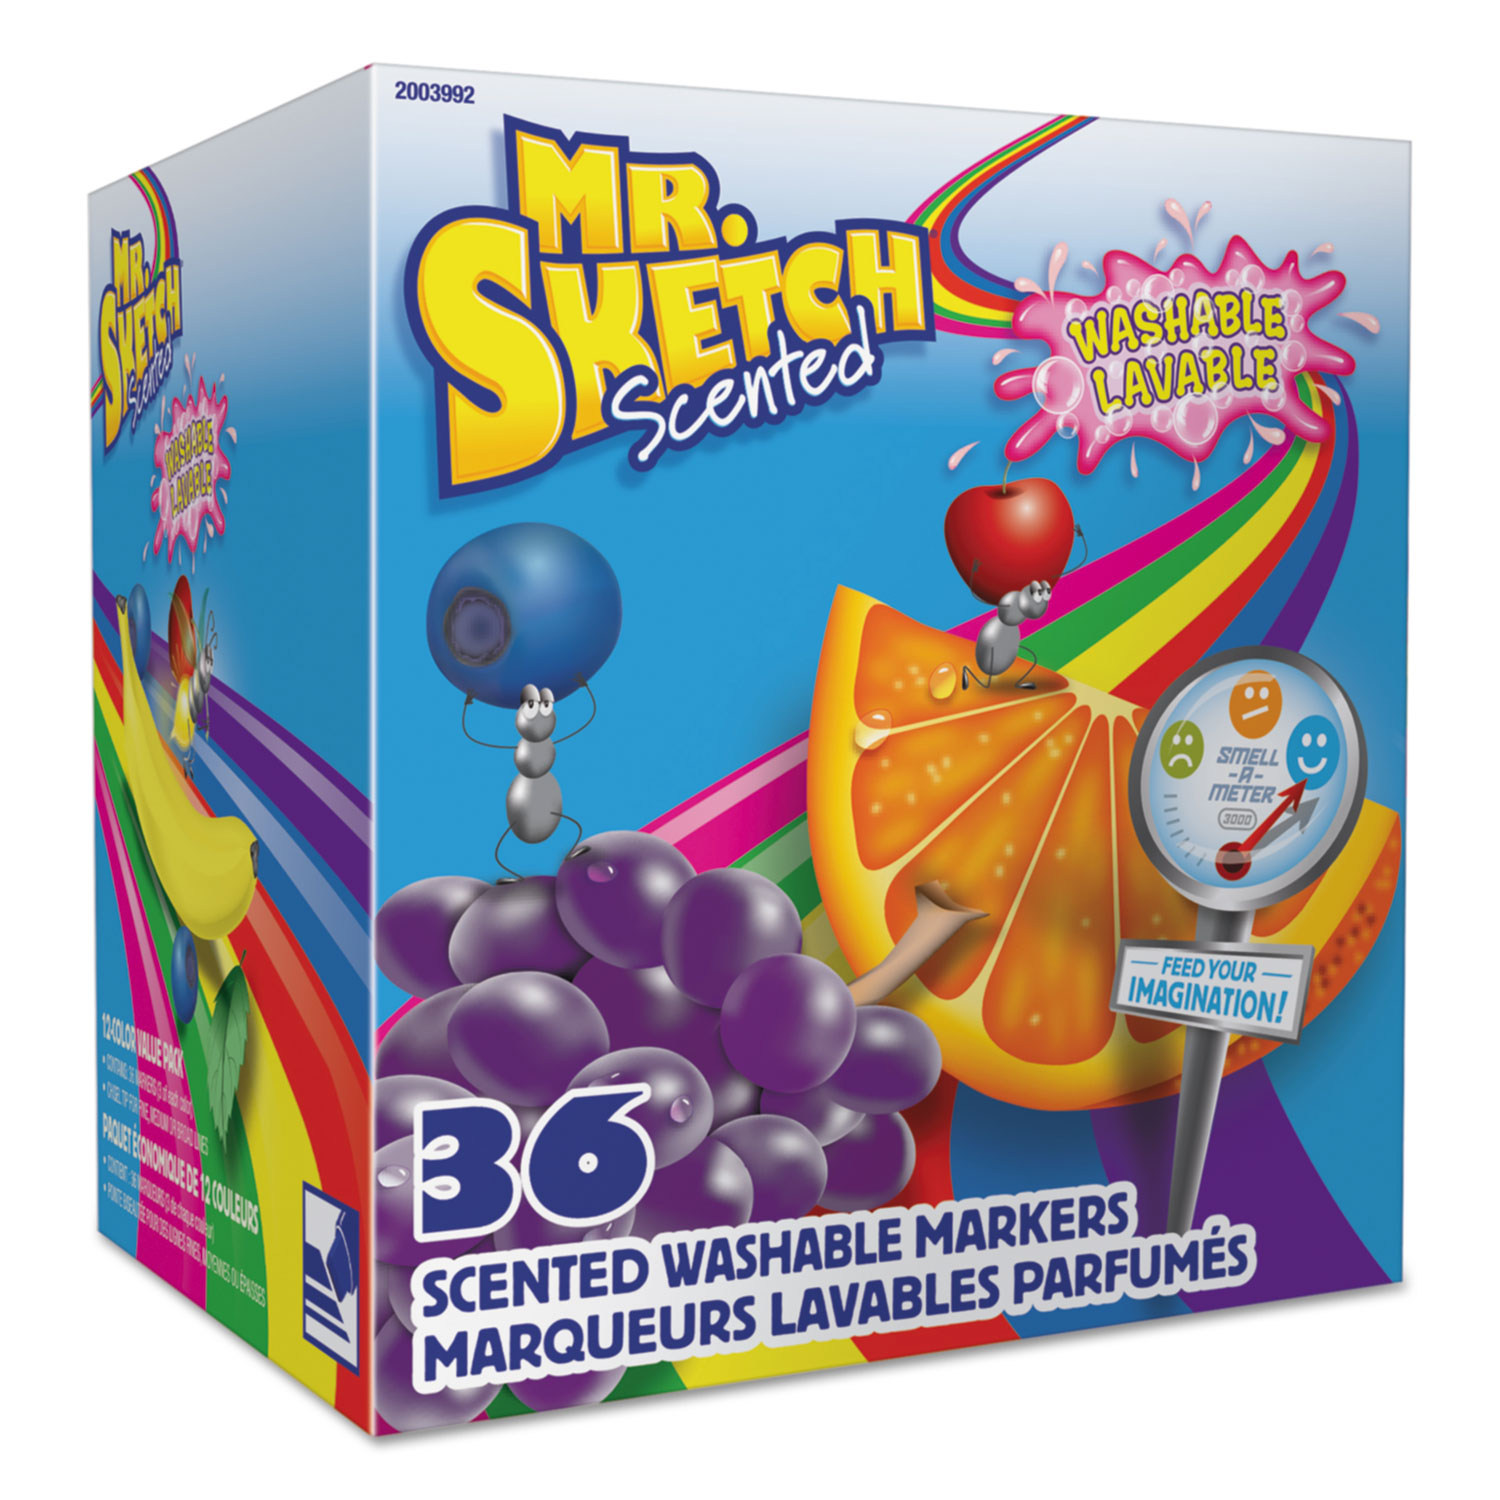  Mr. Sketch 2003992 Scented Washable Markers - Classroom Pack, Broad Chisel Tip, Assorted Colors, 36/Pack (SAN2003992) 